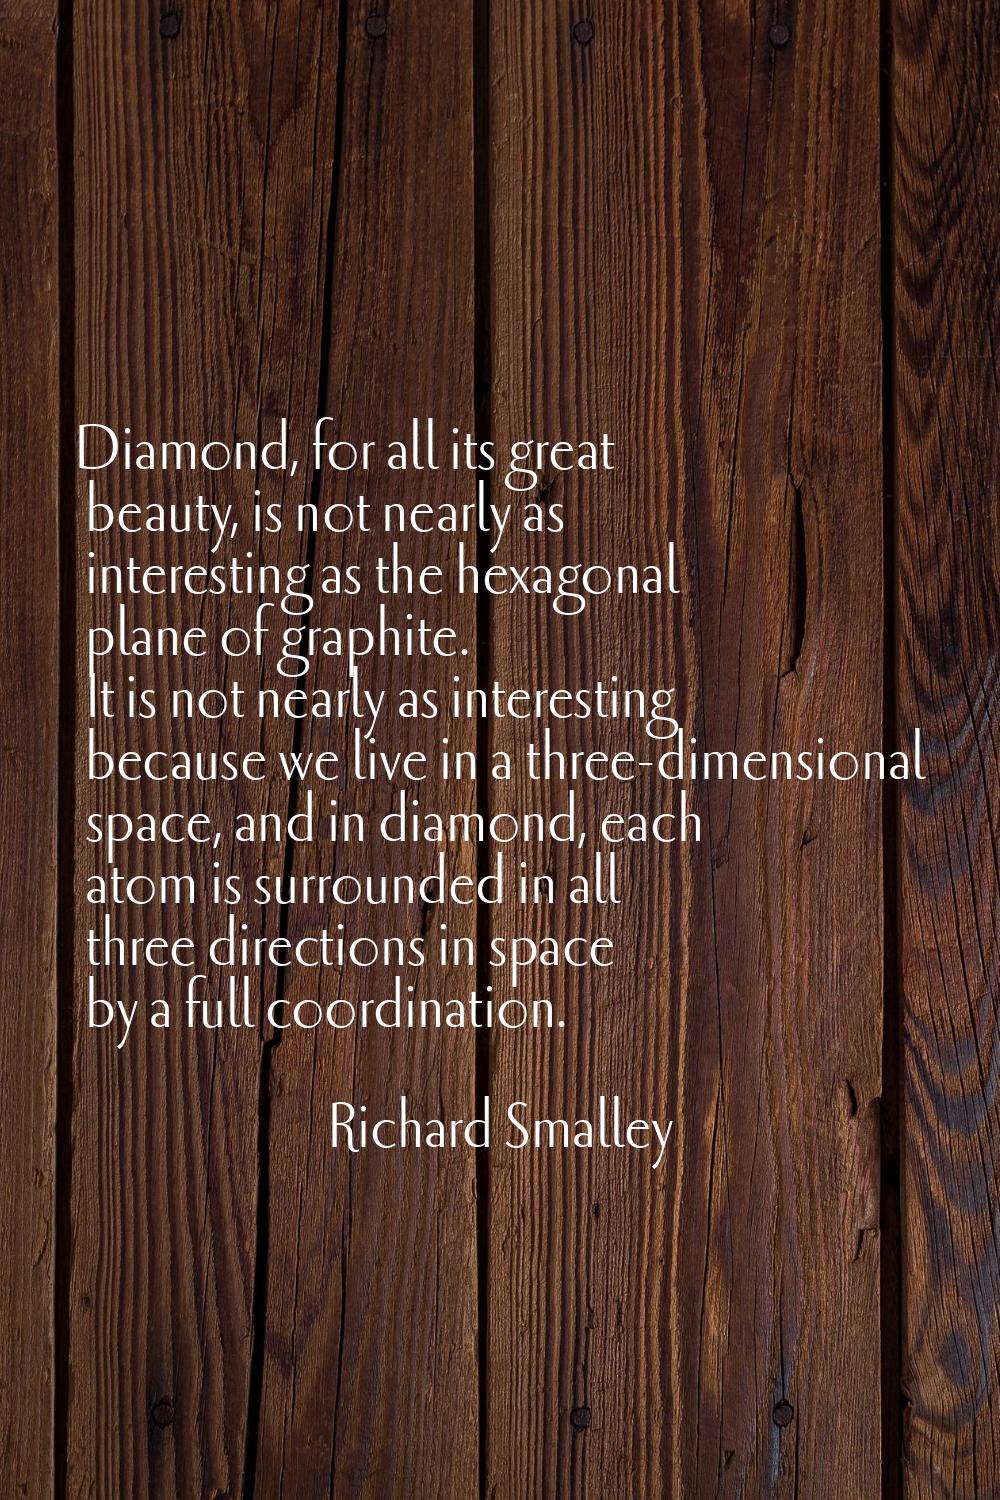 Diamond, for all its great beauty, is not nearly as interesting as the hexagonal plane of graphite.